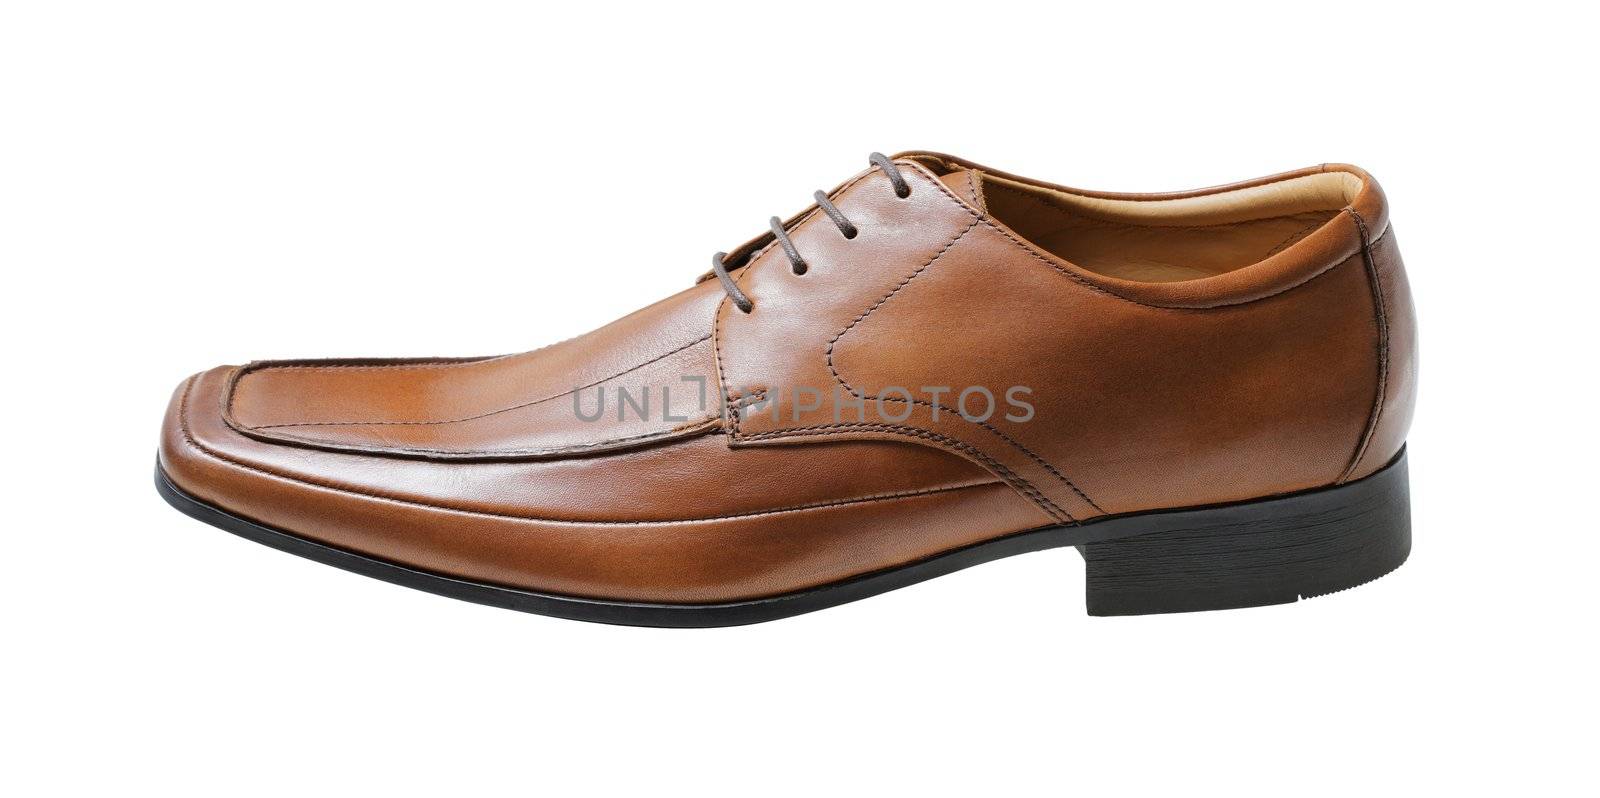 Men's brown leather shoe isolated over white